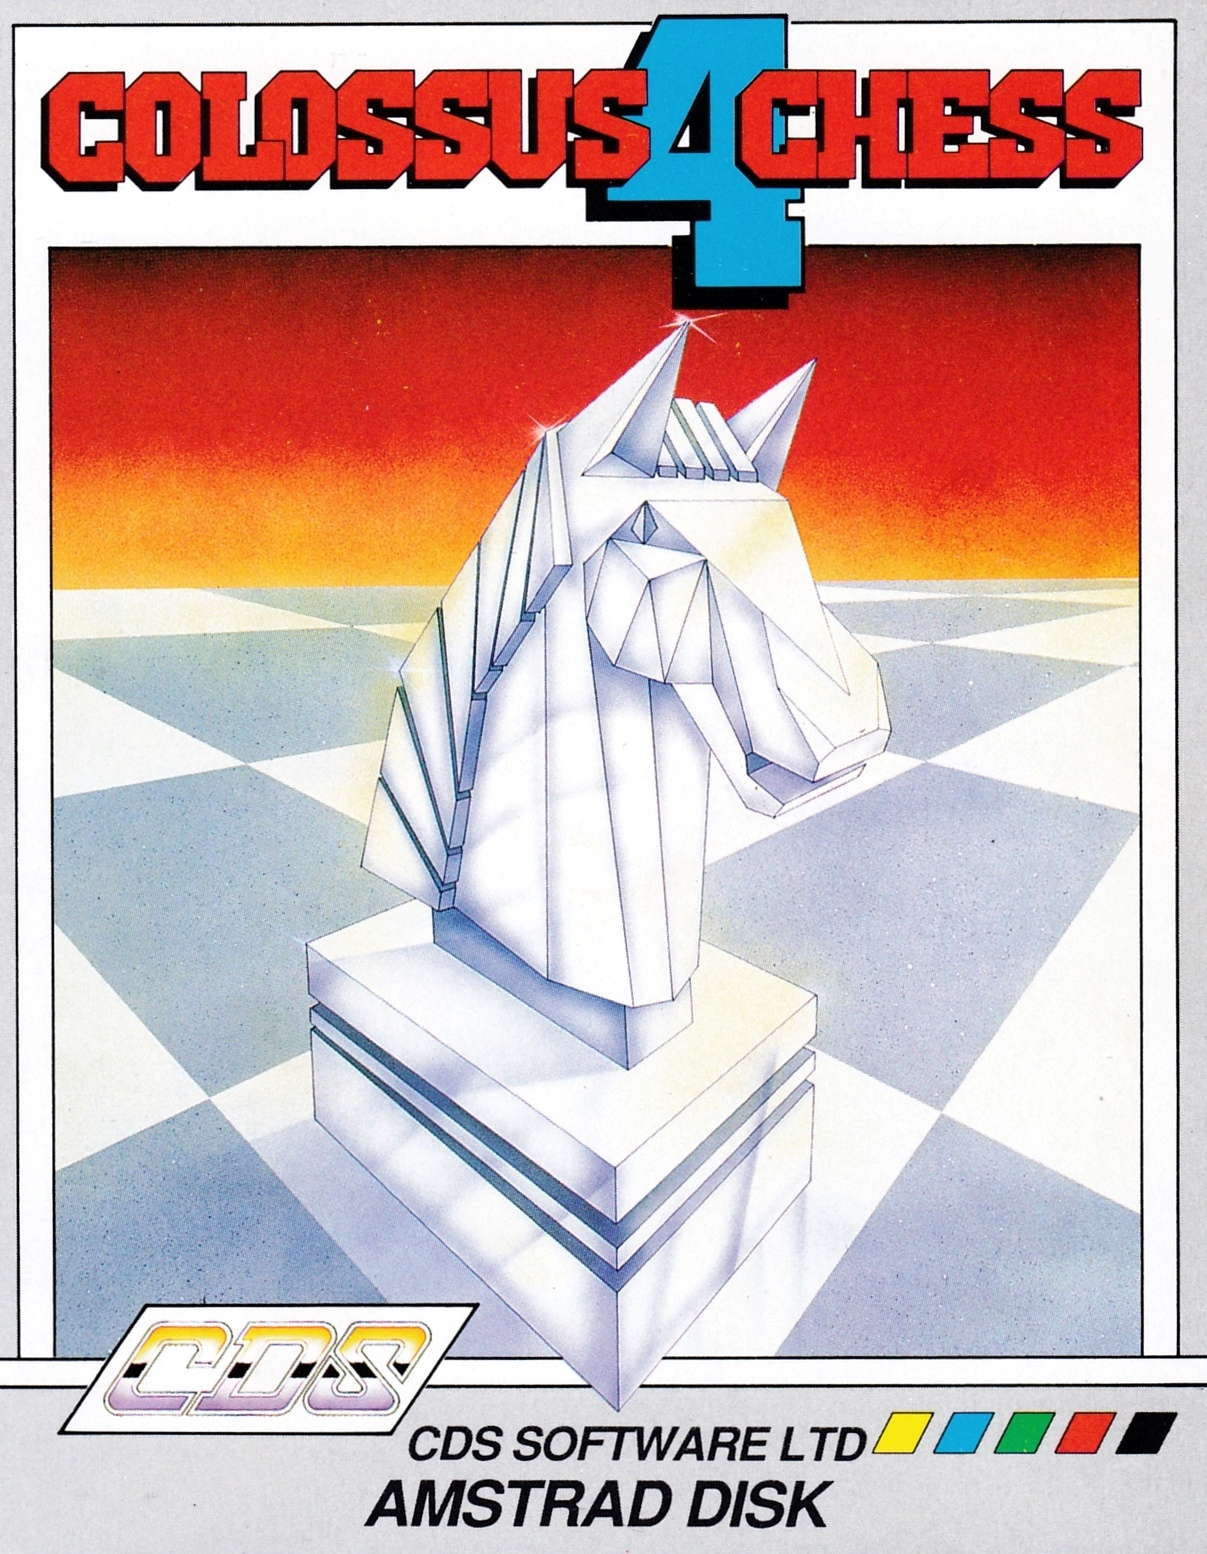 cover of the Amstrad CPC game Colossus Chess 4  by GameBase CPC